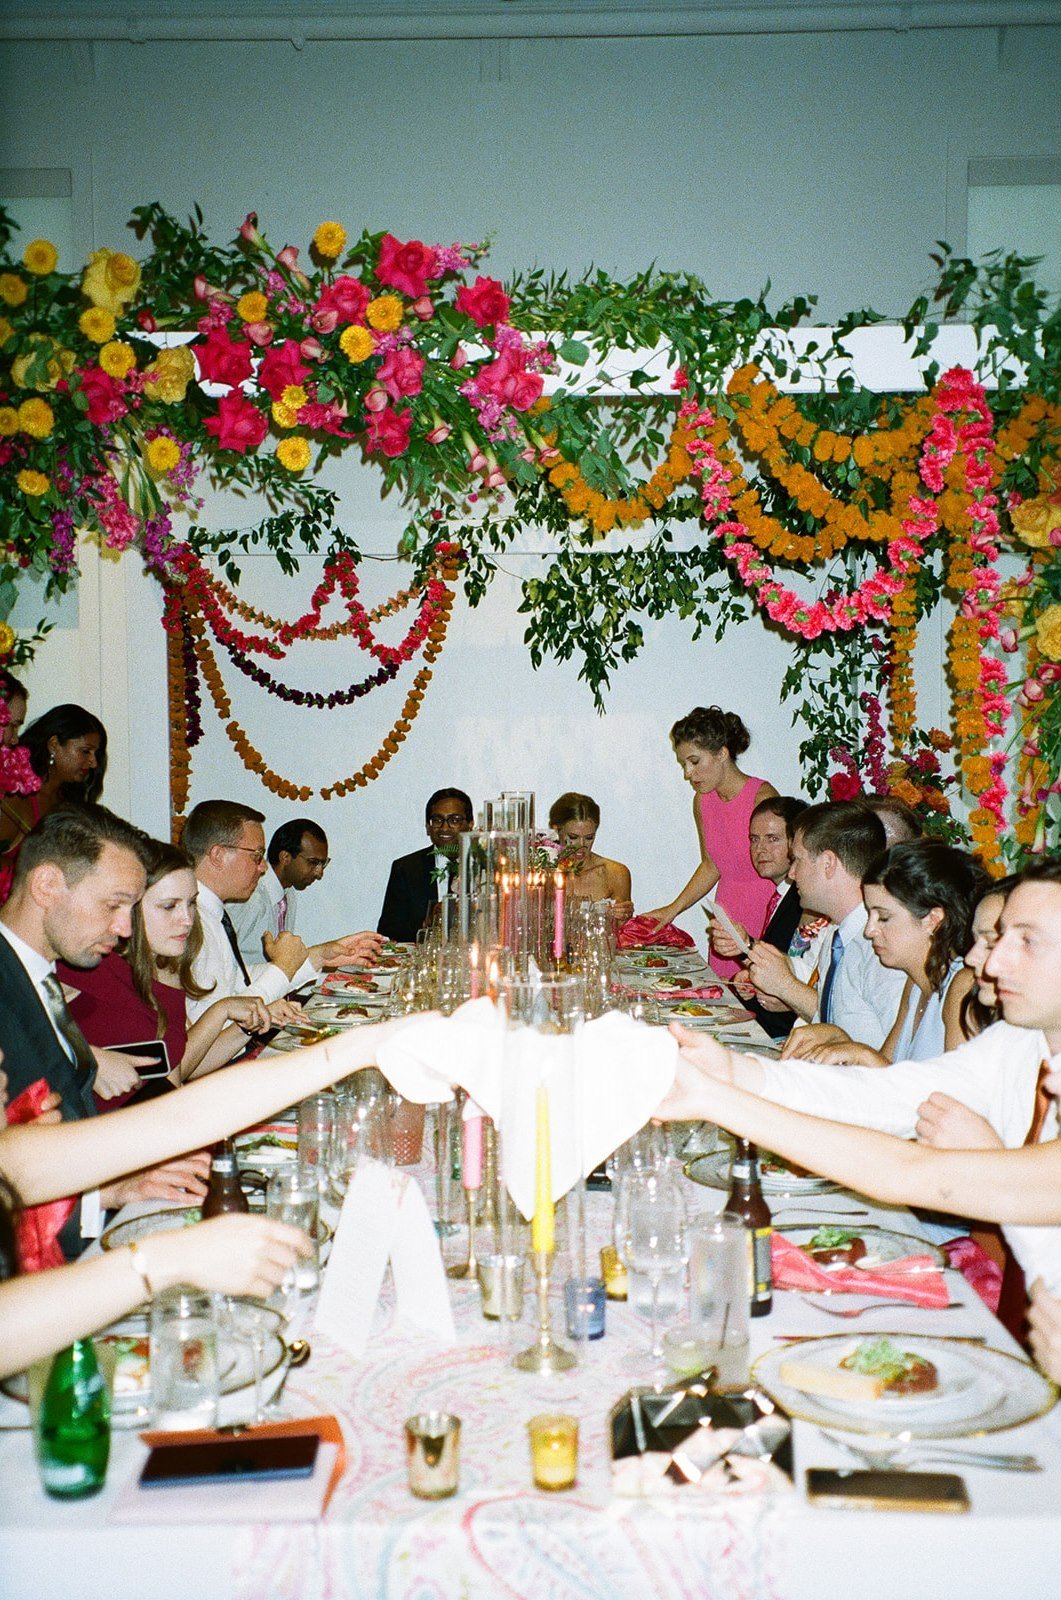 Film Photos from a Vibrant Midwest Wedding with Indian elements